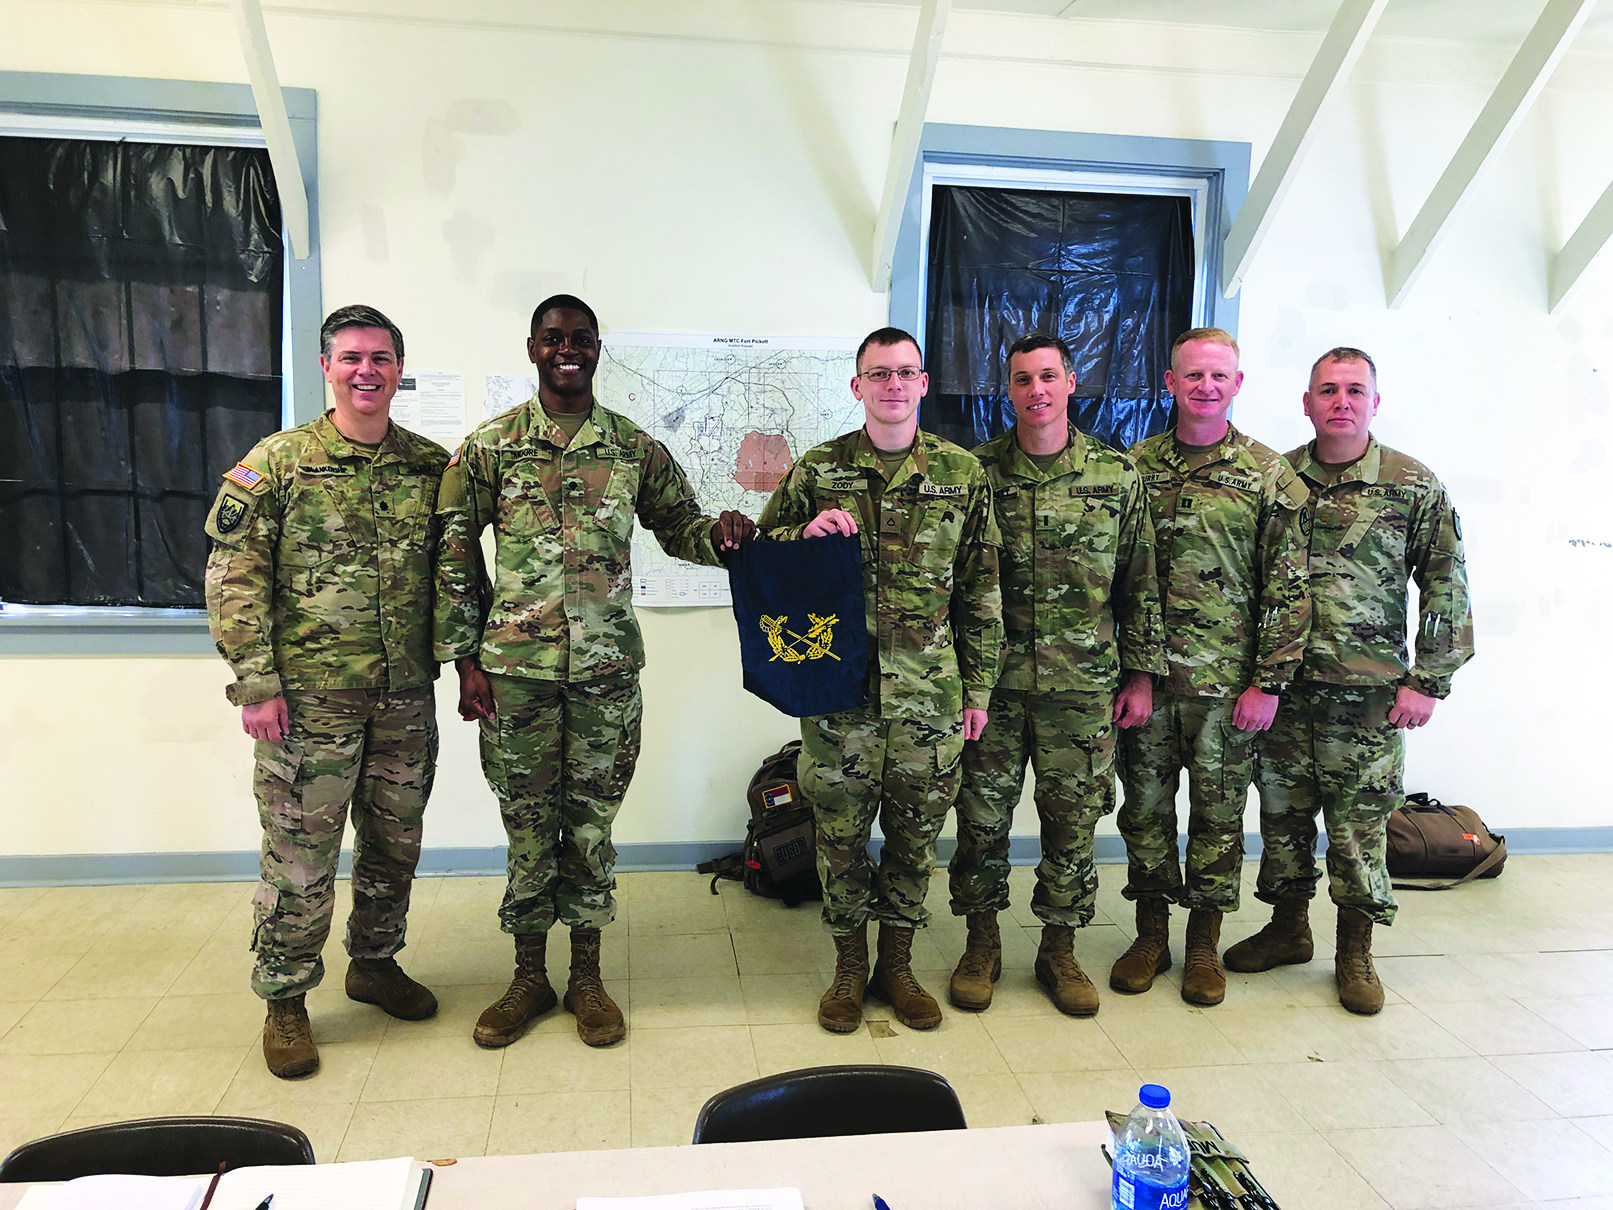 Members of the North Carolina Army National Guard JAG Corps come together after an administrative separation board conducted during annual training at Fort Pickett, VA. Pictured from L to R: LTC Brian Blankenship, SPC John Moore, PFC Brian Zody, 1LT Chris Harrell, CPT Tom Murry, and MAJ Scott Somerset.